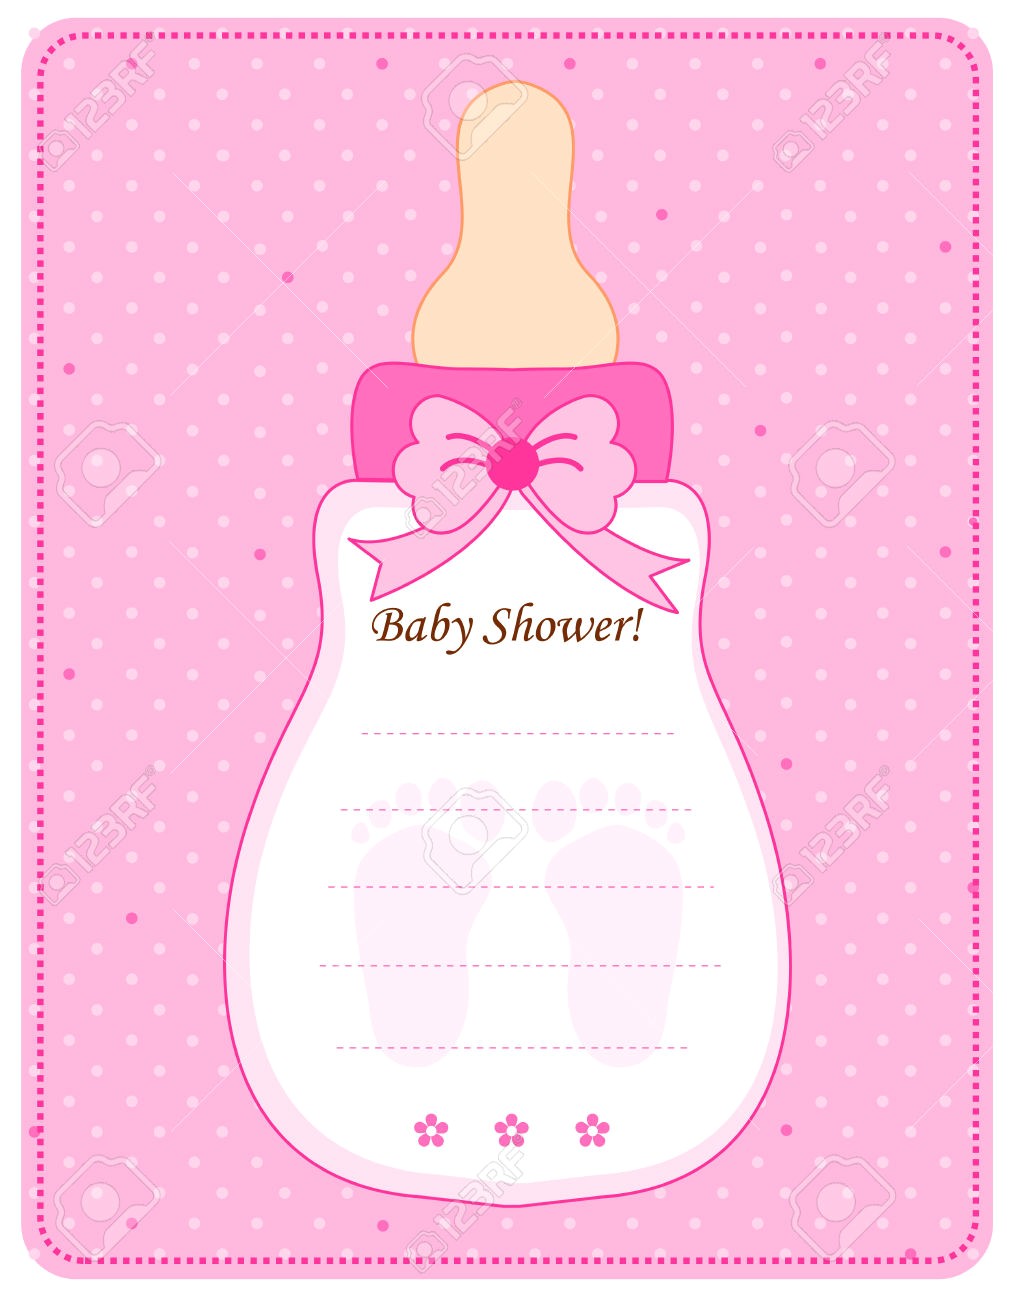 Example Baby Shower Invites Baby Shower Invitations for Girls Templates